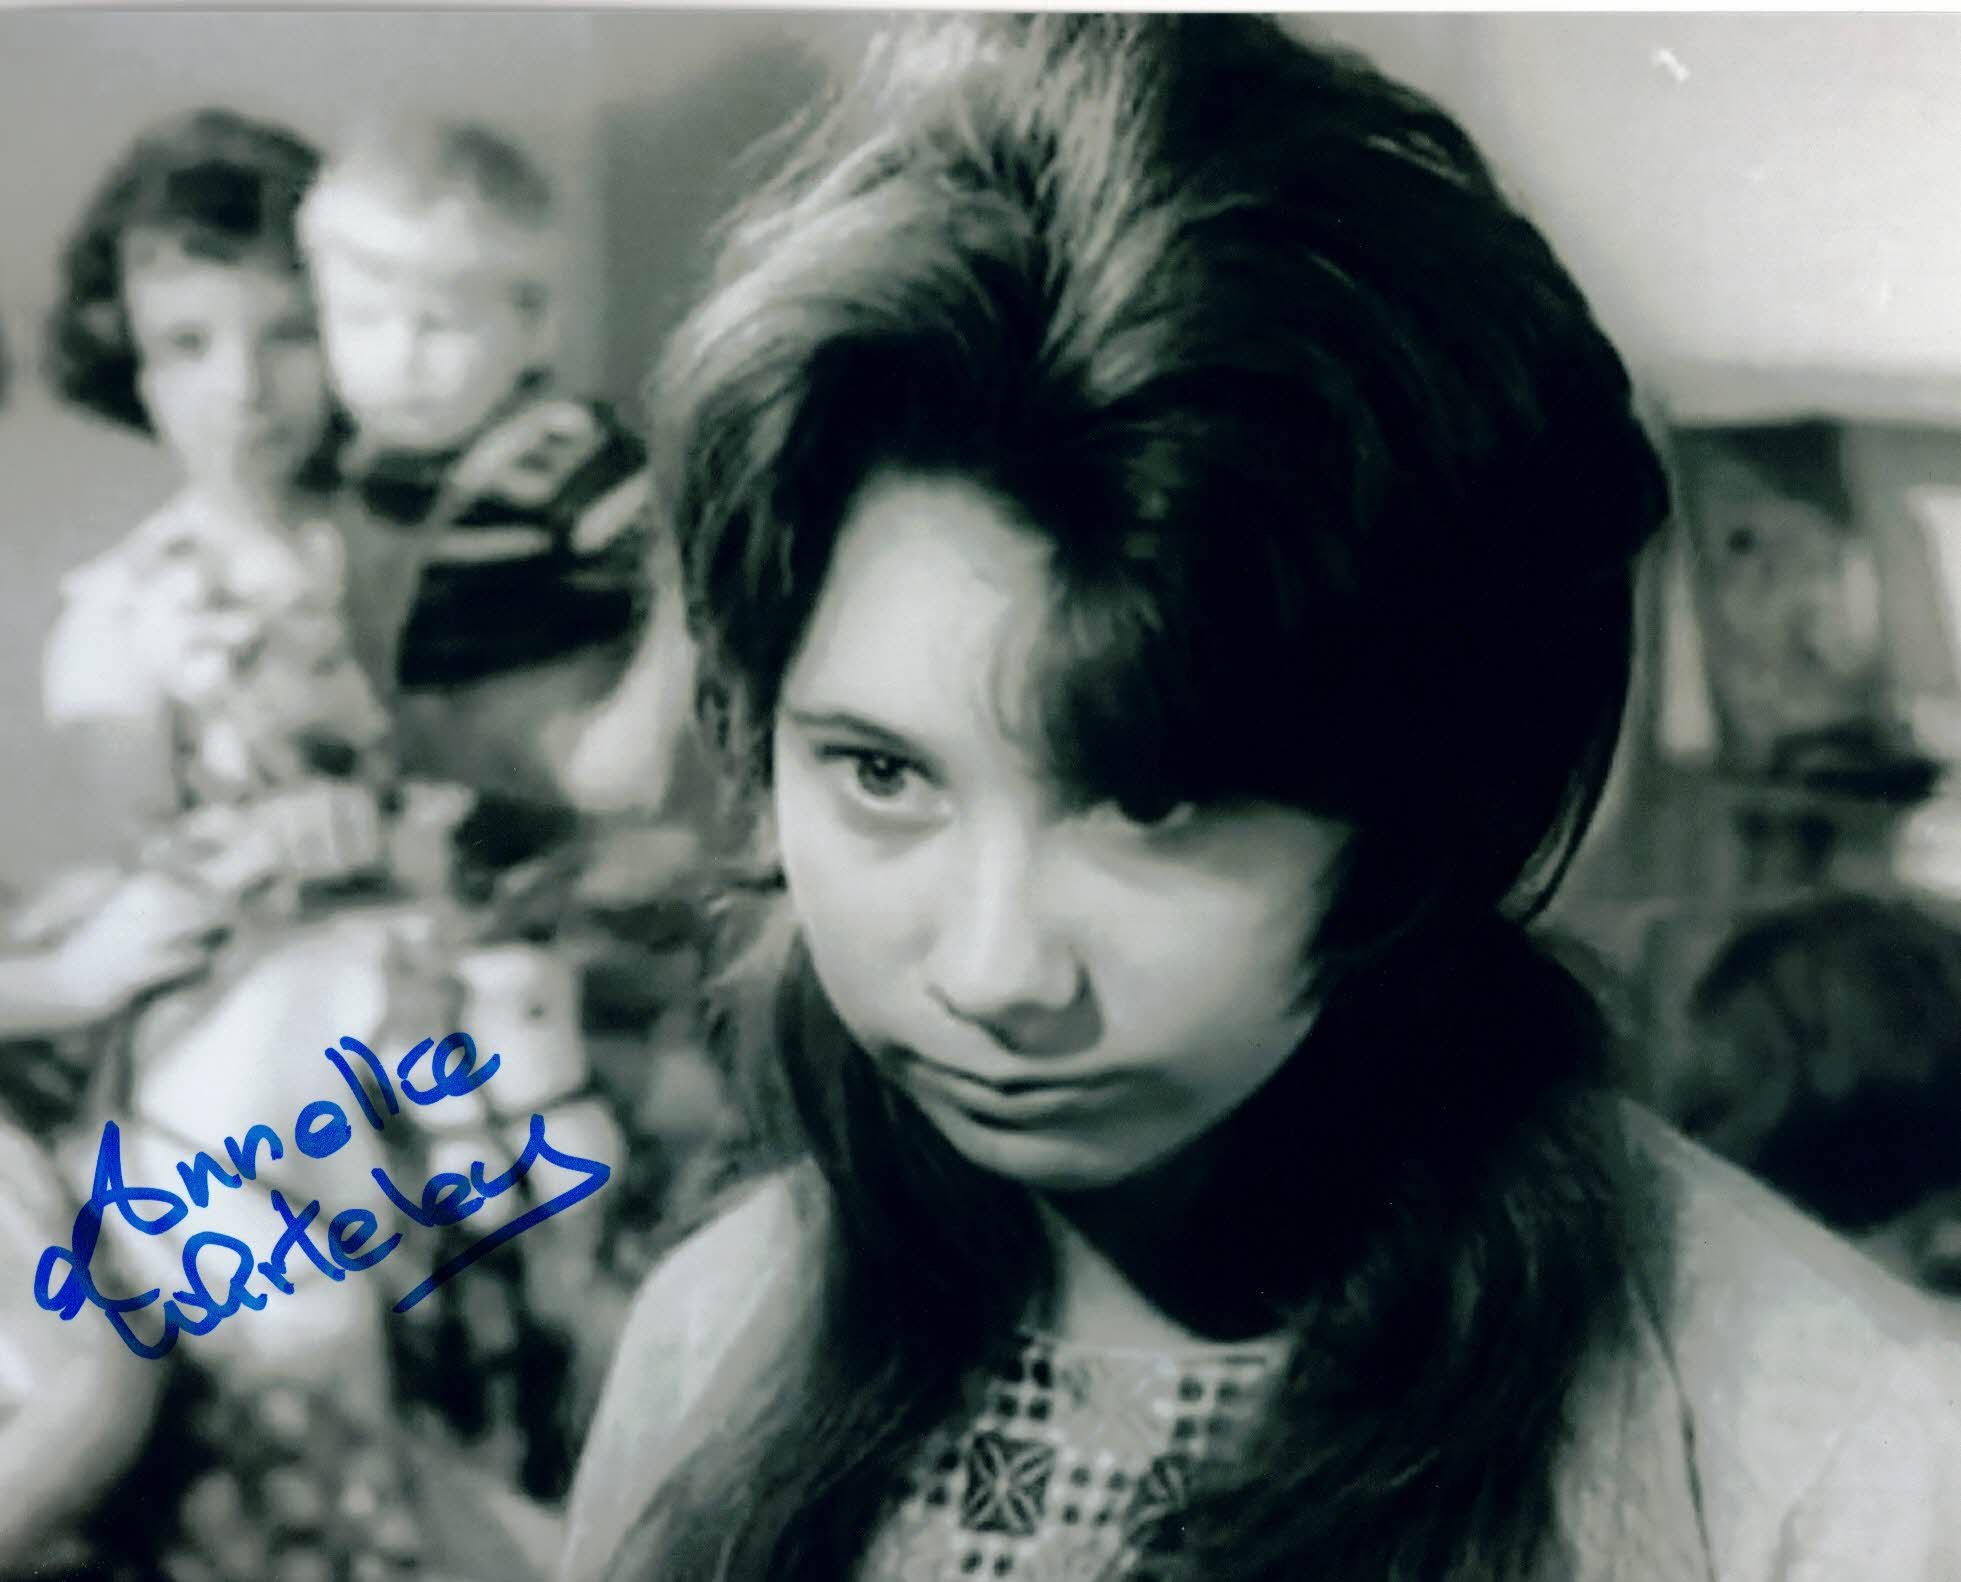 ANNETTE WHITELEY - Sheila in Girl on Approval -   hand signed 10 x 8 photo